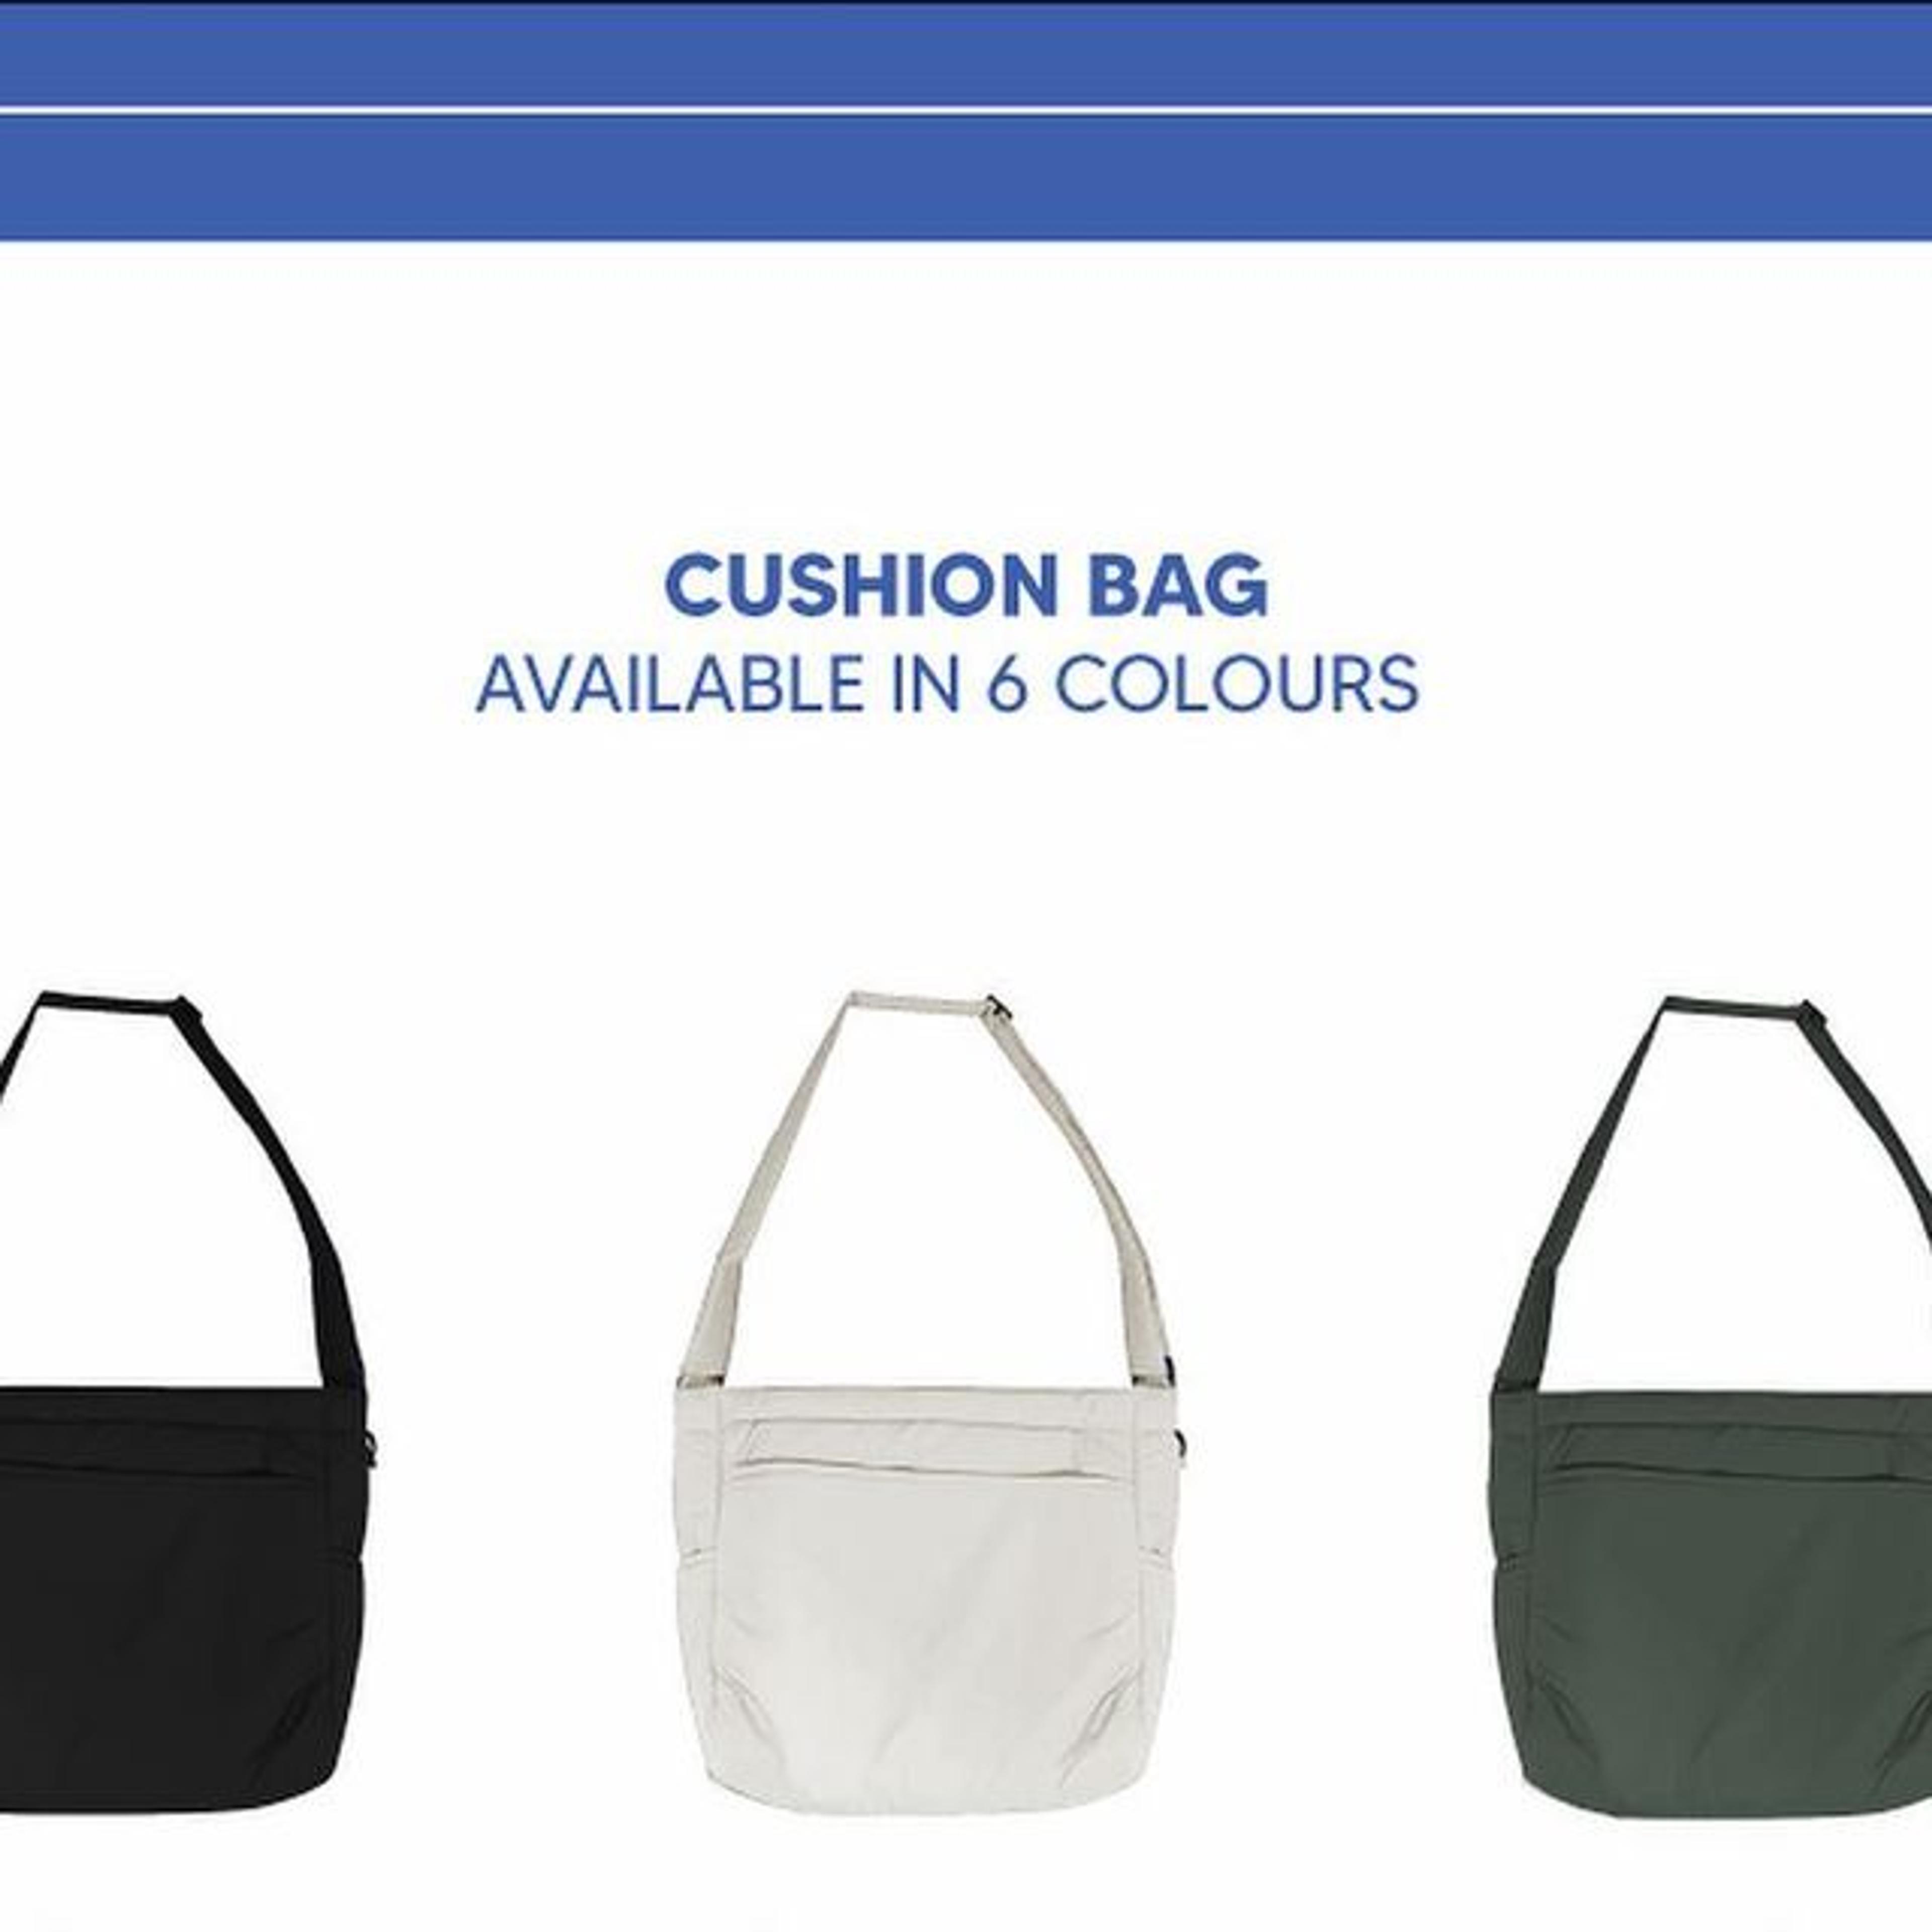 The Everyday Club on Instagram: "More details on the Cushion Bags! Made from the same nylon-cotton blend as our best selling Pillow bag series. Comes in a total of 6 colors! 3 pockets on the outside, inner pocket flap and a laptop divider inside! Fits up to 14” laptop. Finished with YKK branded zipper for the durable and smooth finish! 
Launching online and at our Orchard Central popup from 1130 onwards!"